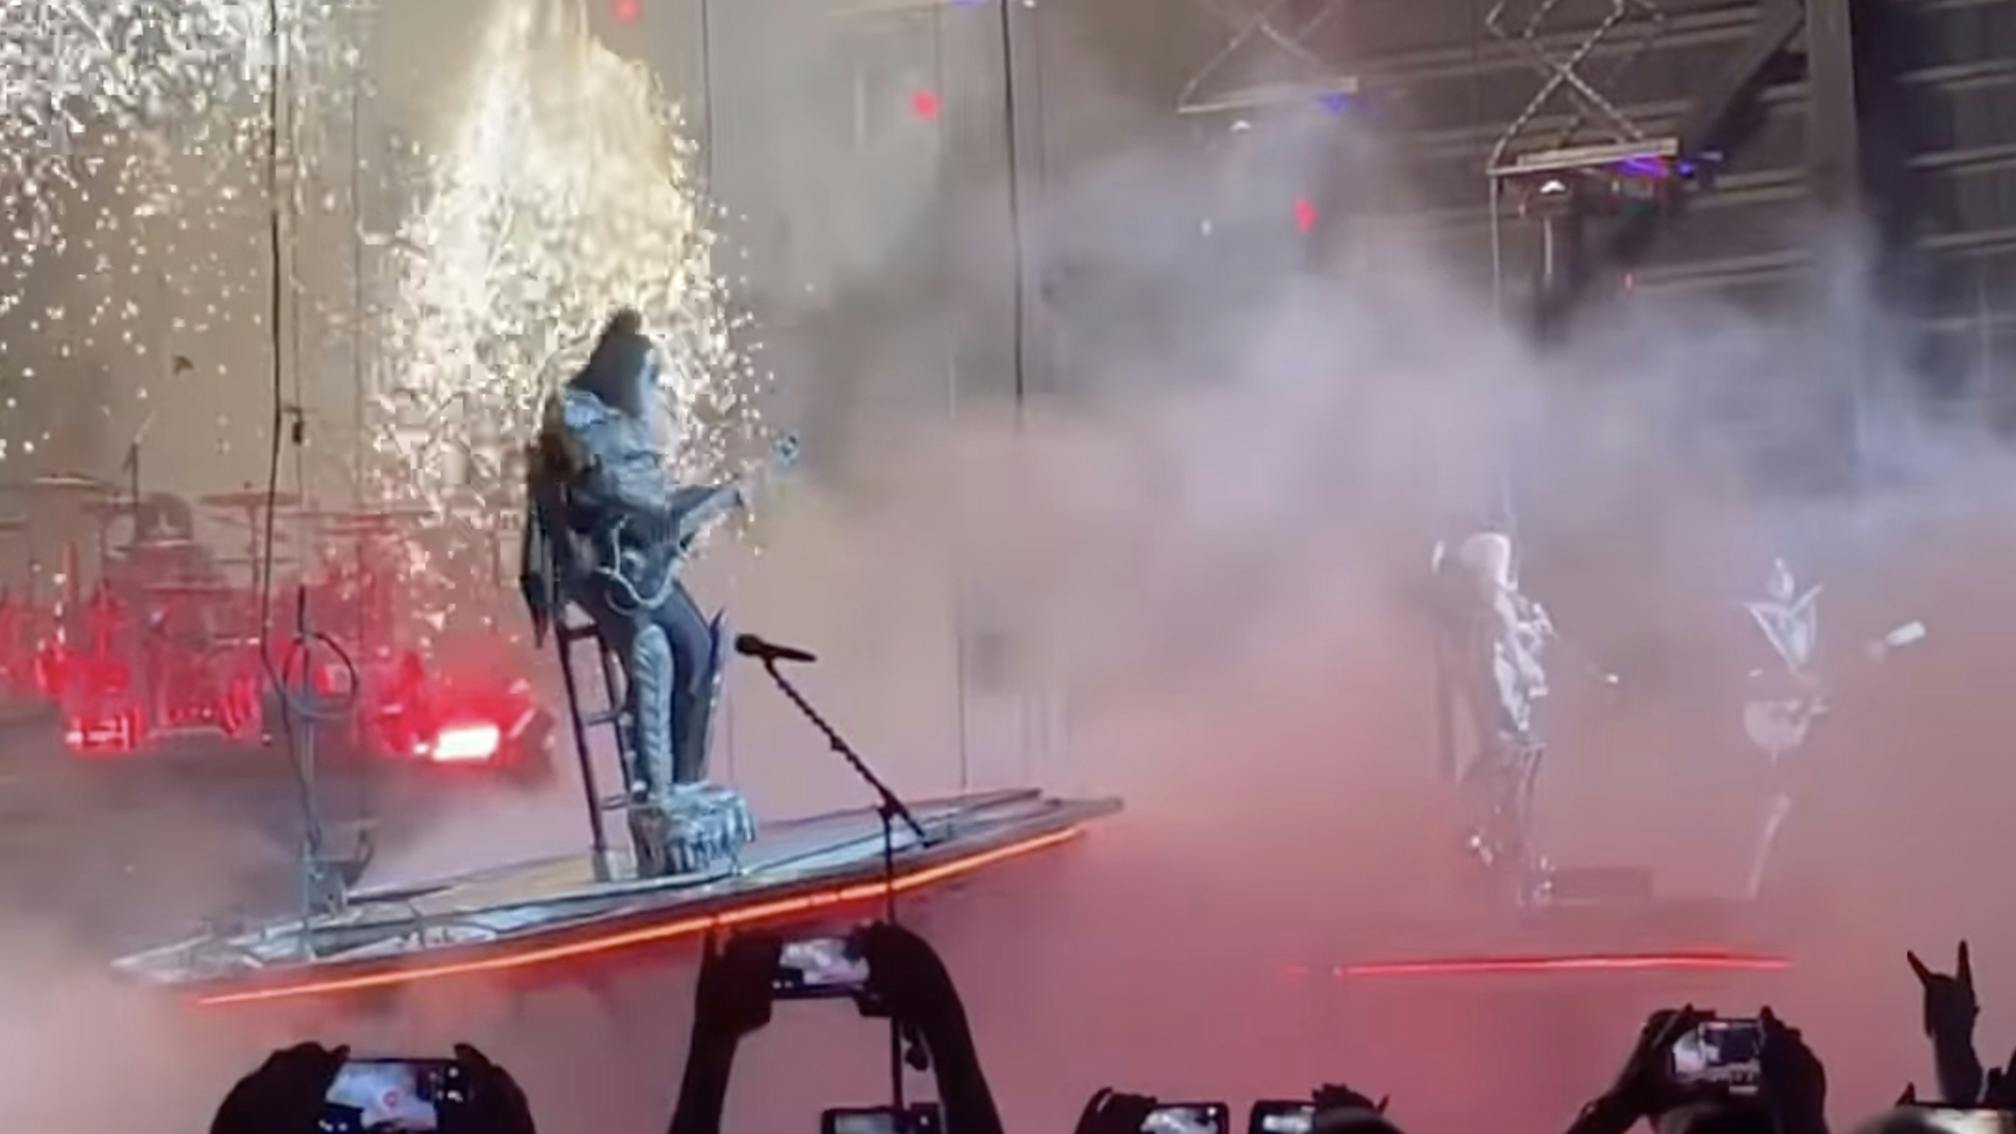 Gene Simmons experiences 'Spinal Tap moment' as platform malfunctions at KISS show